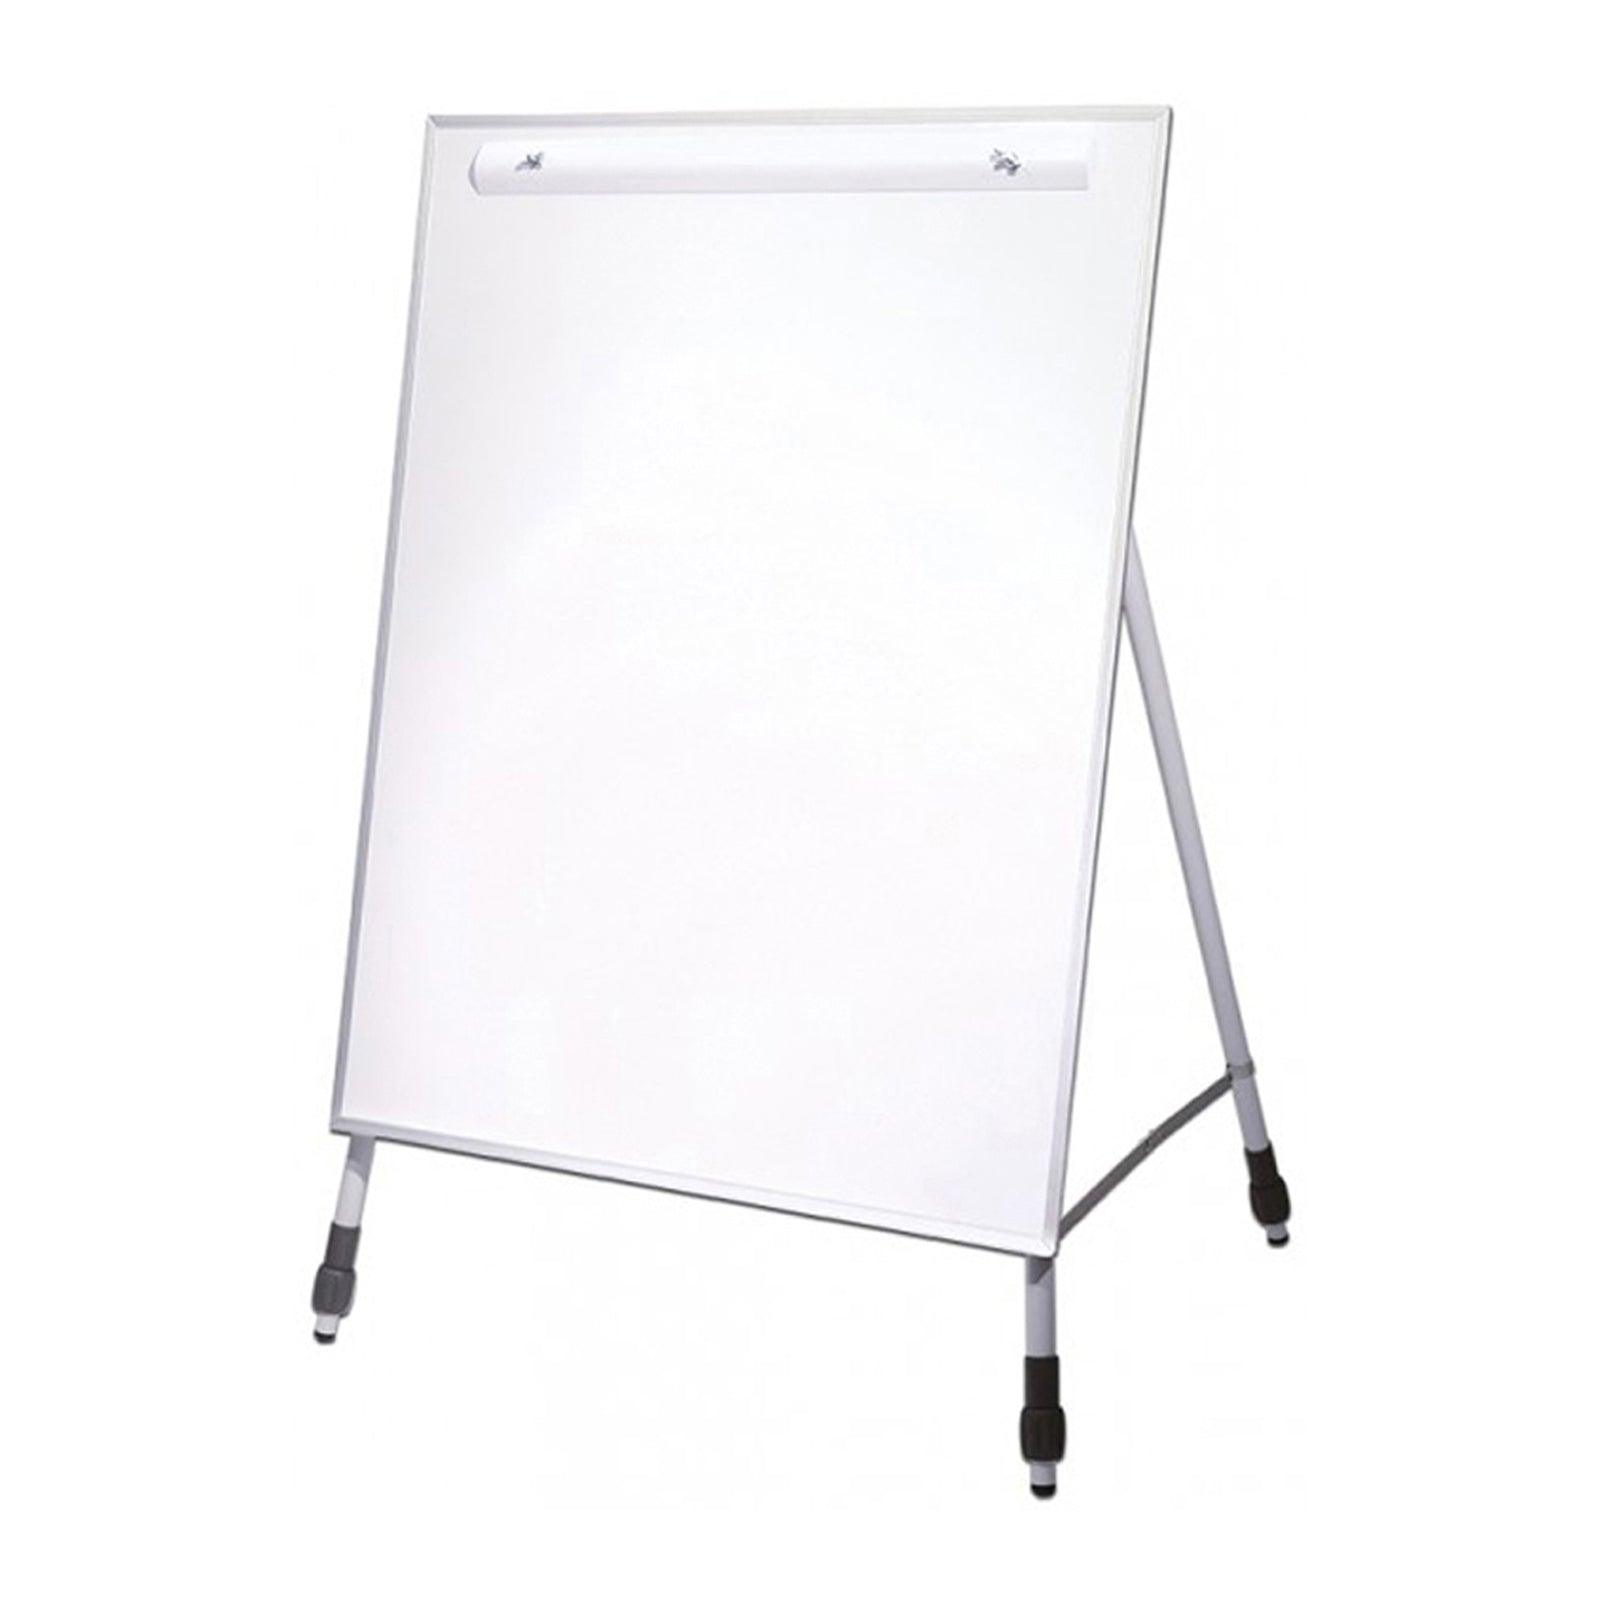 Dry Erase Easel with Adjustable Legs, 46" x 5" x 29.5" - Loomini